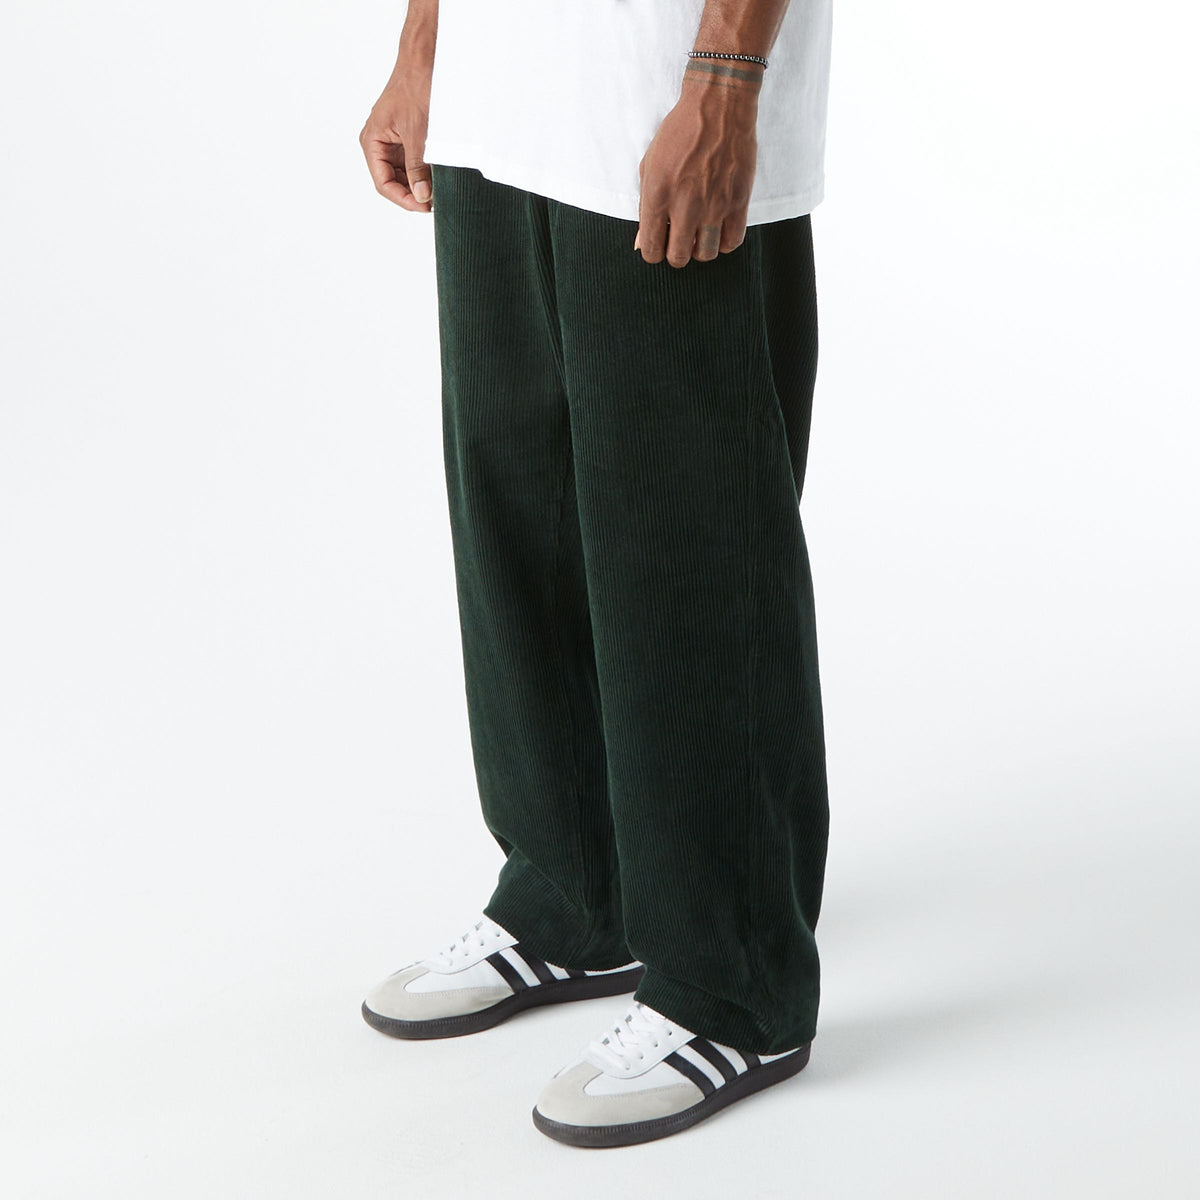 Homeboy XTra BAGGY Cord Pants  buy at Blue Tomato